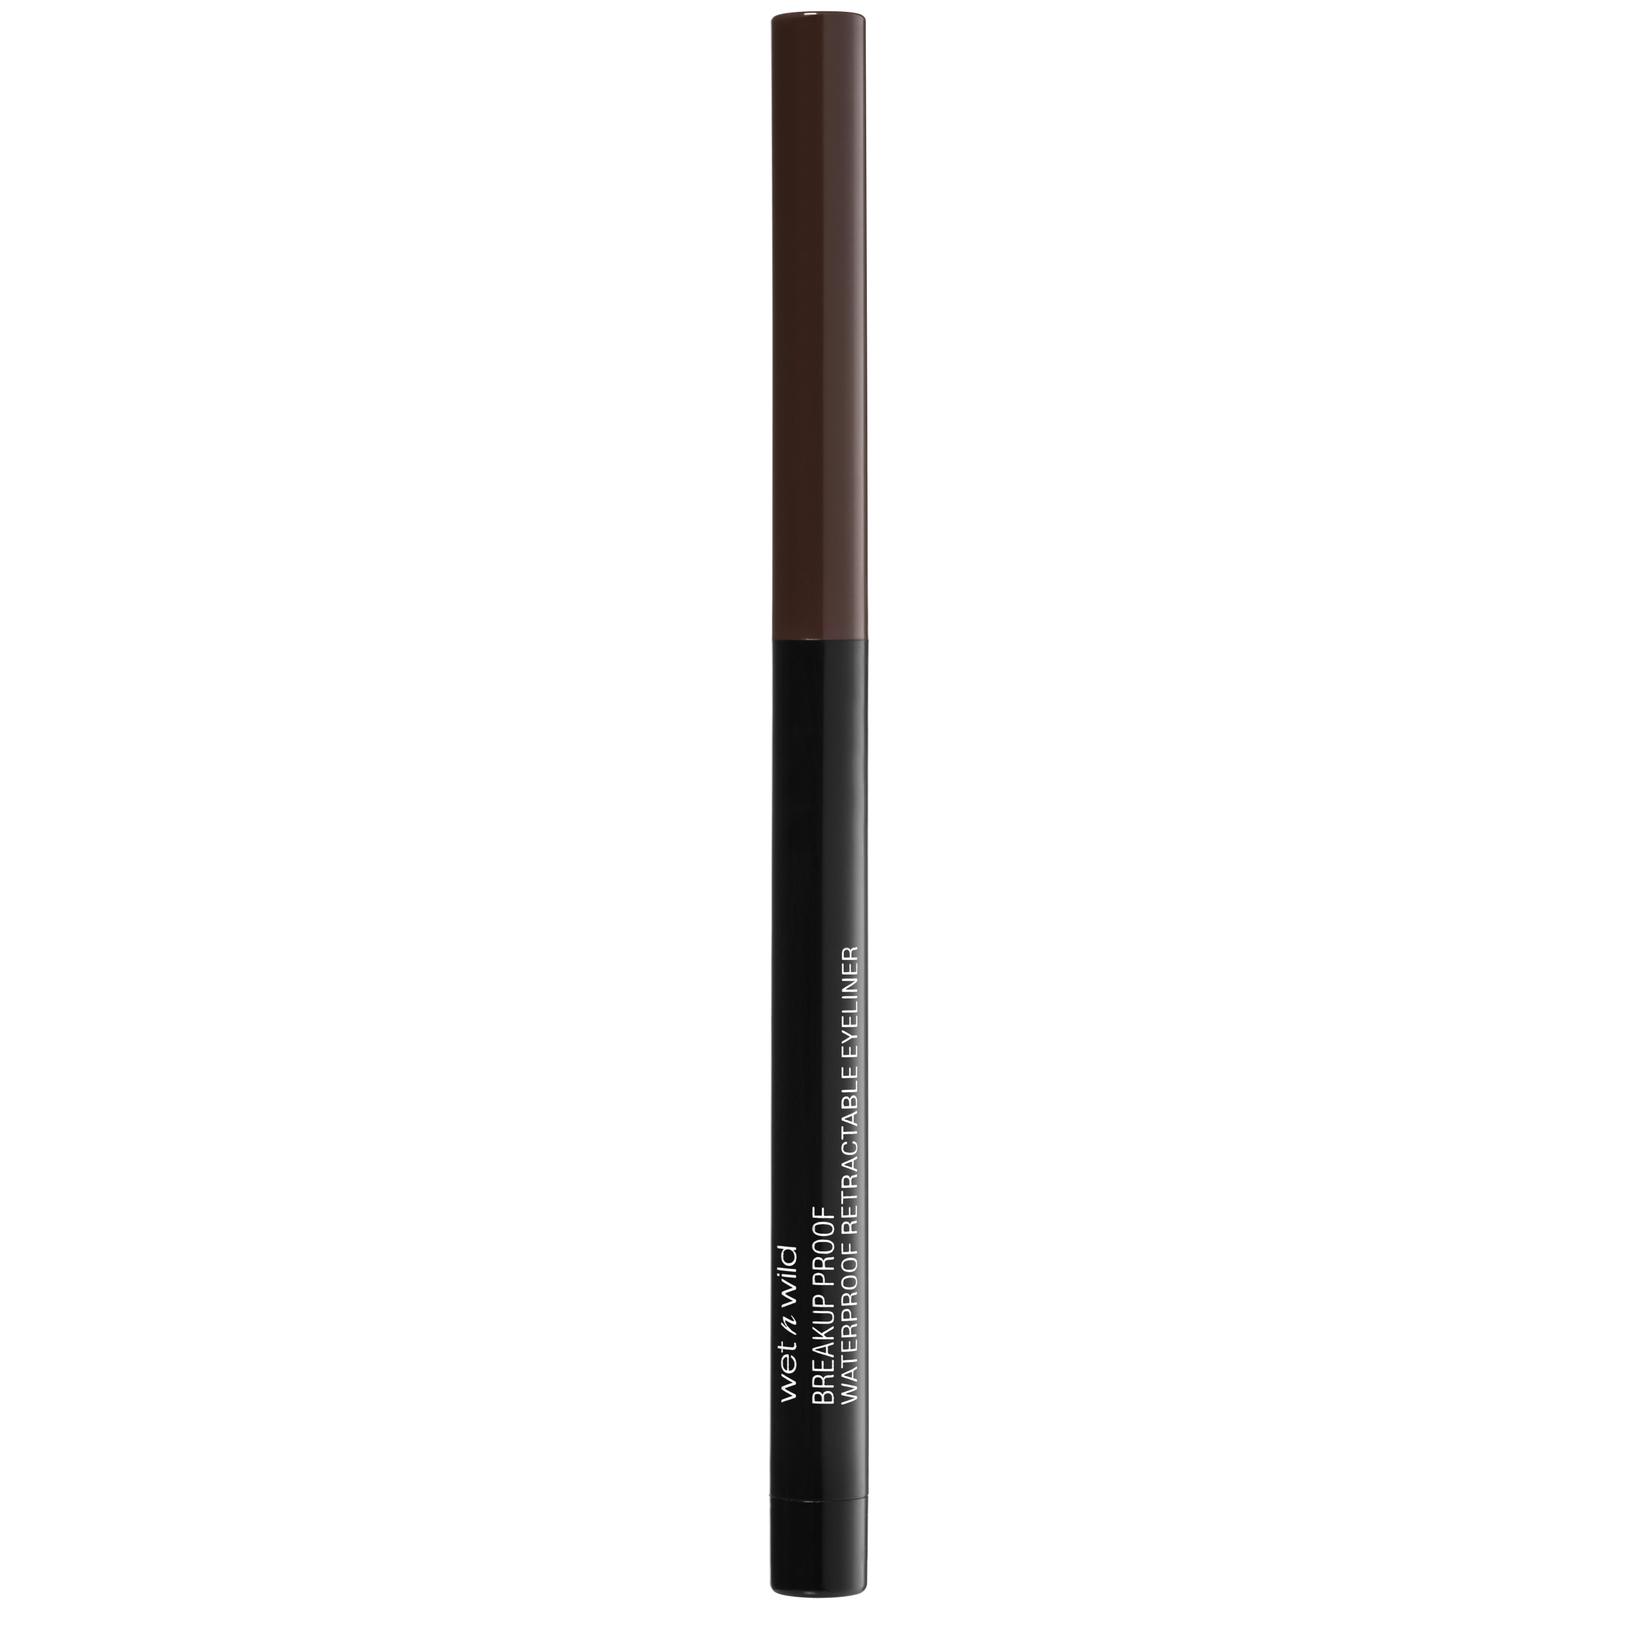 Selected image for wet n wild Megalast Ajlajner retractable 1111493E, Black-brown, 0.23 g